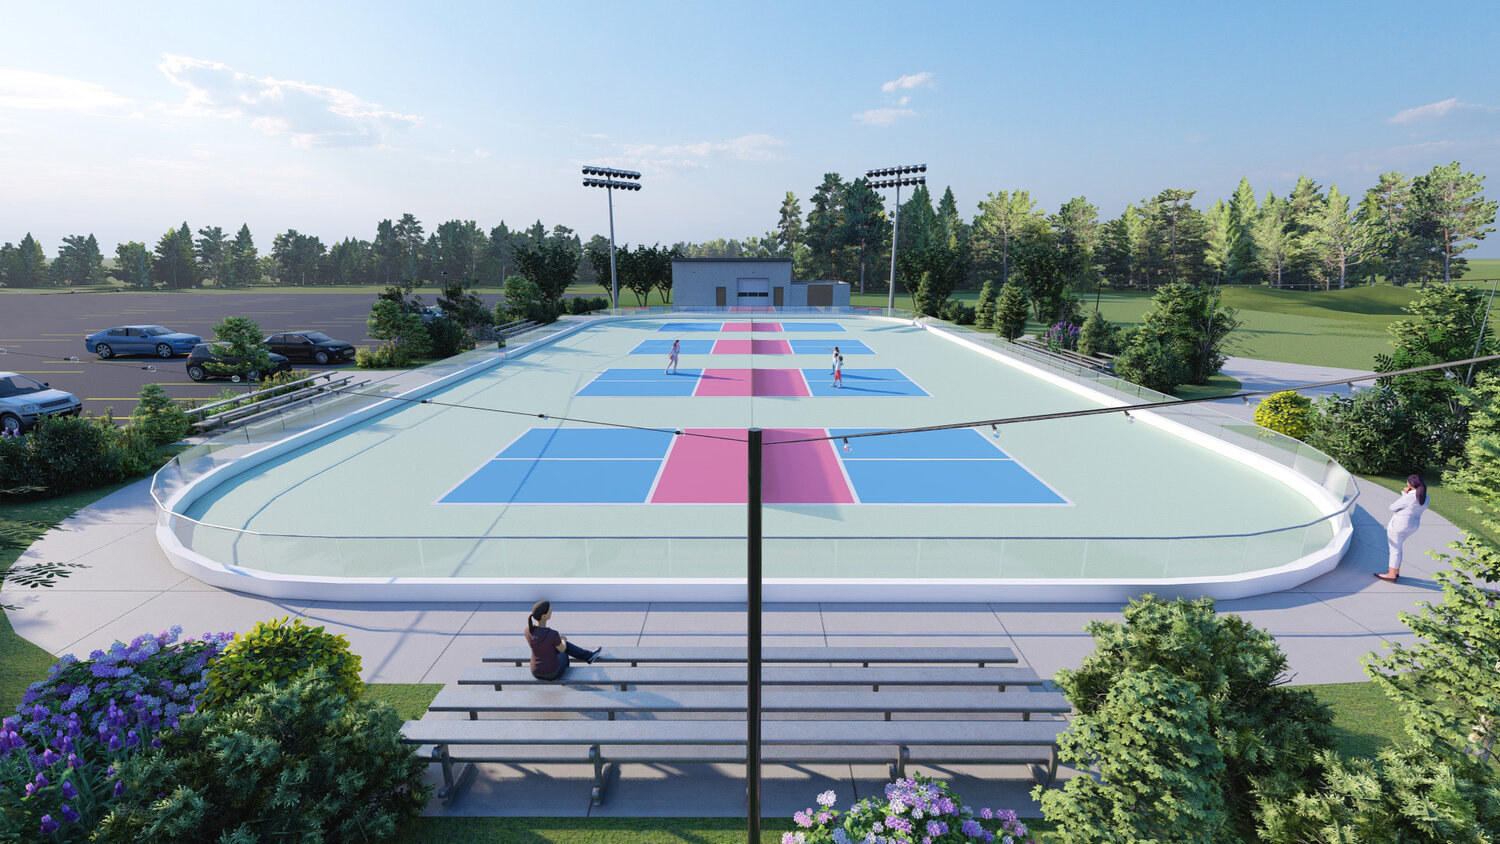 A rendering of what the pickleball courts will look like during the spring and summer months.